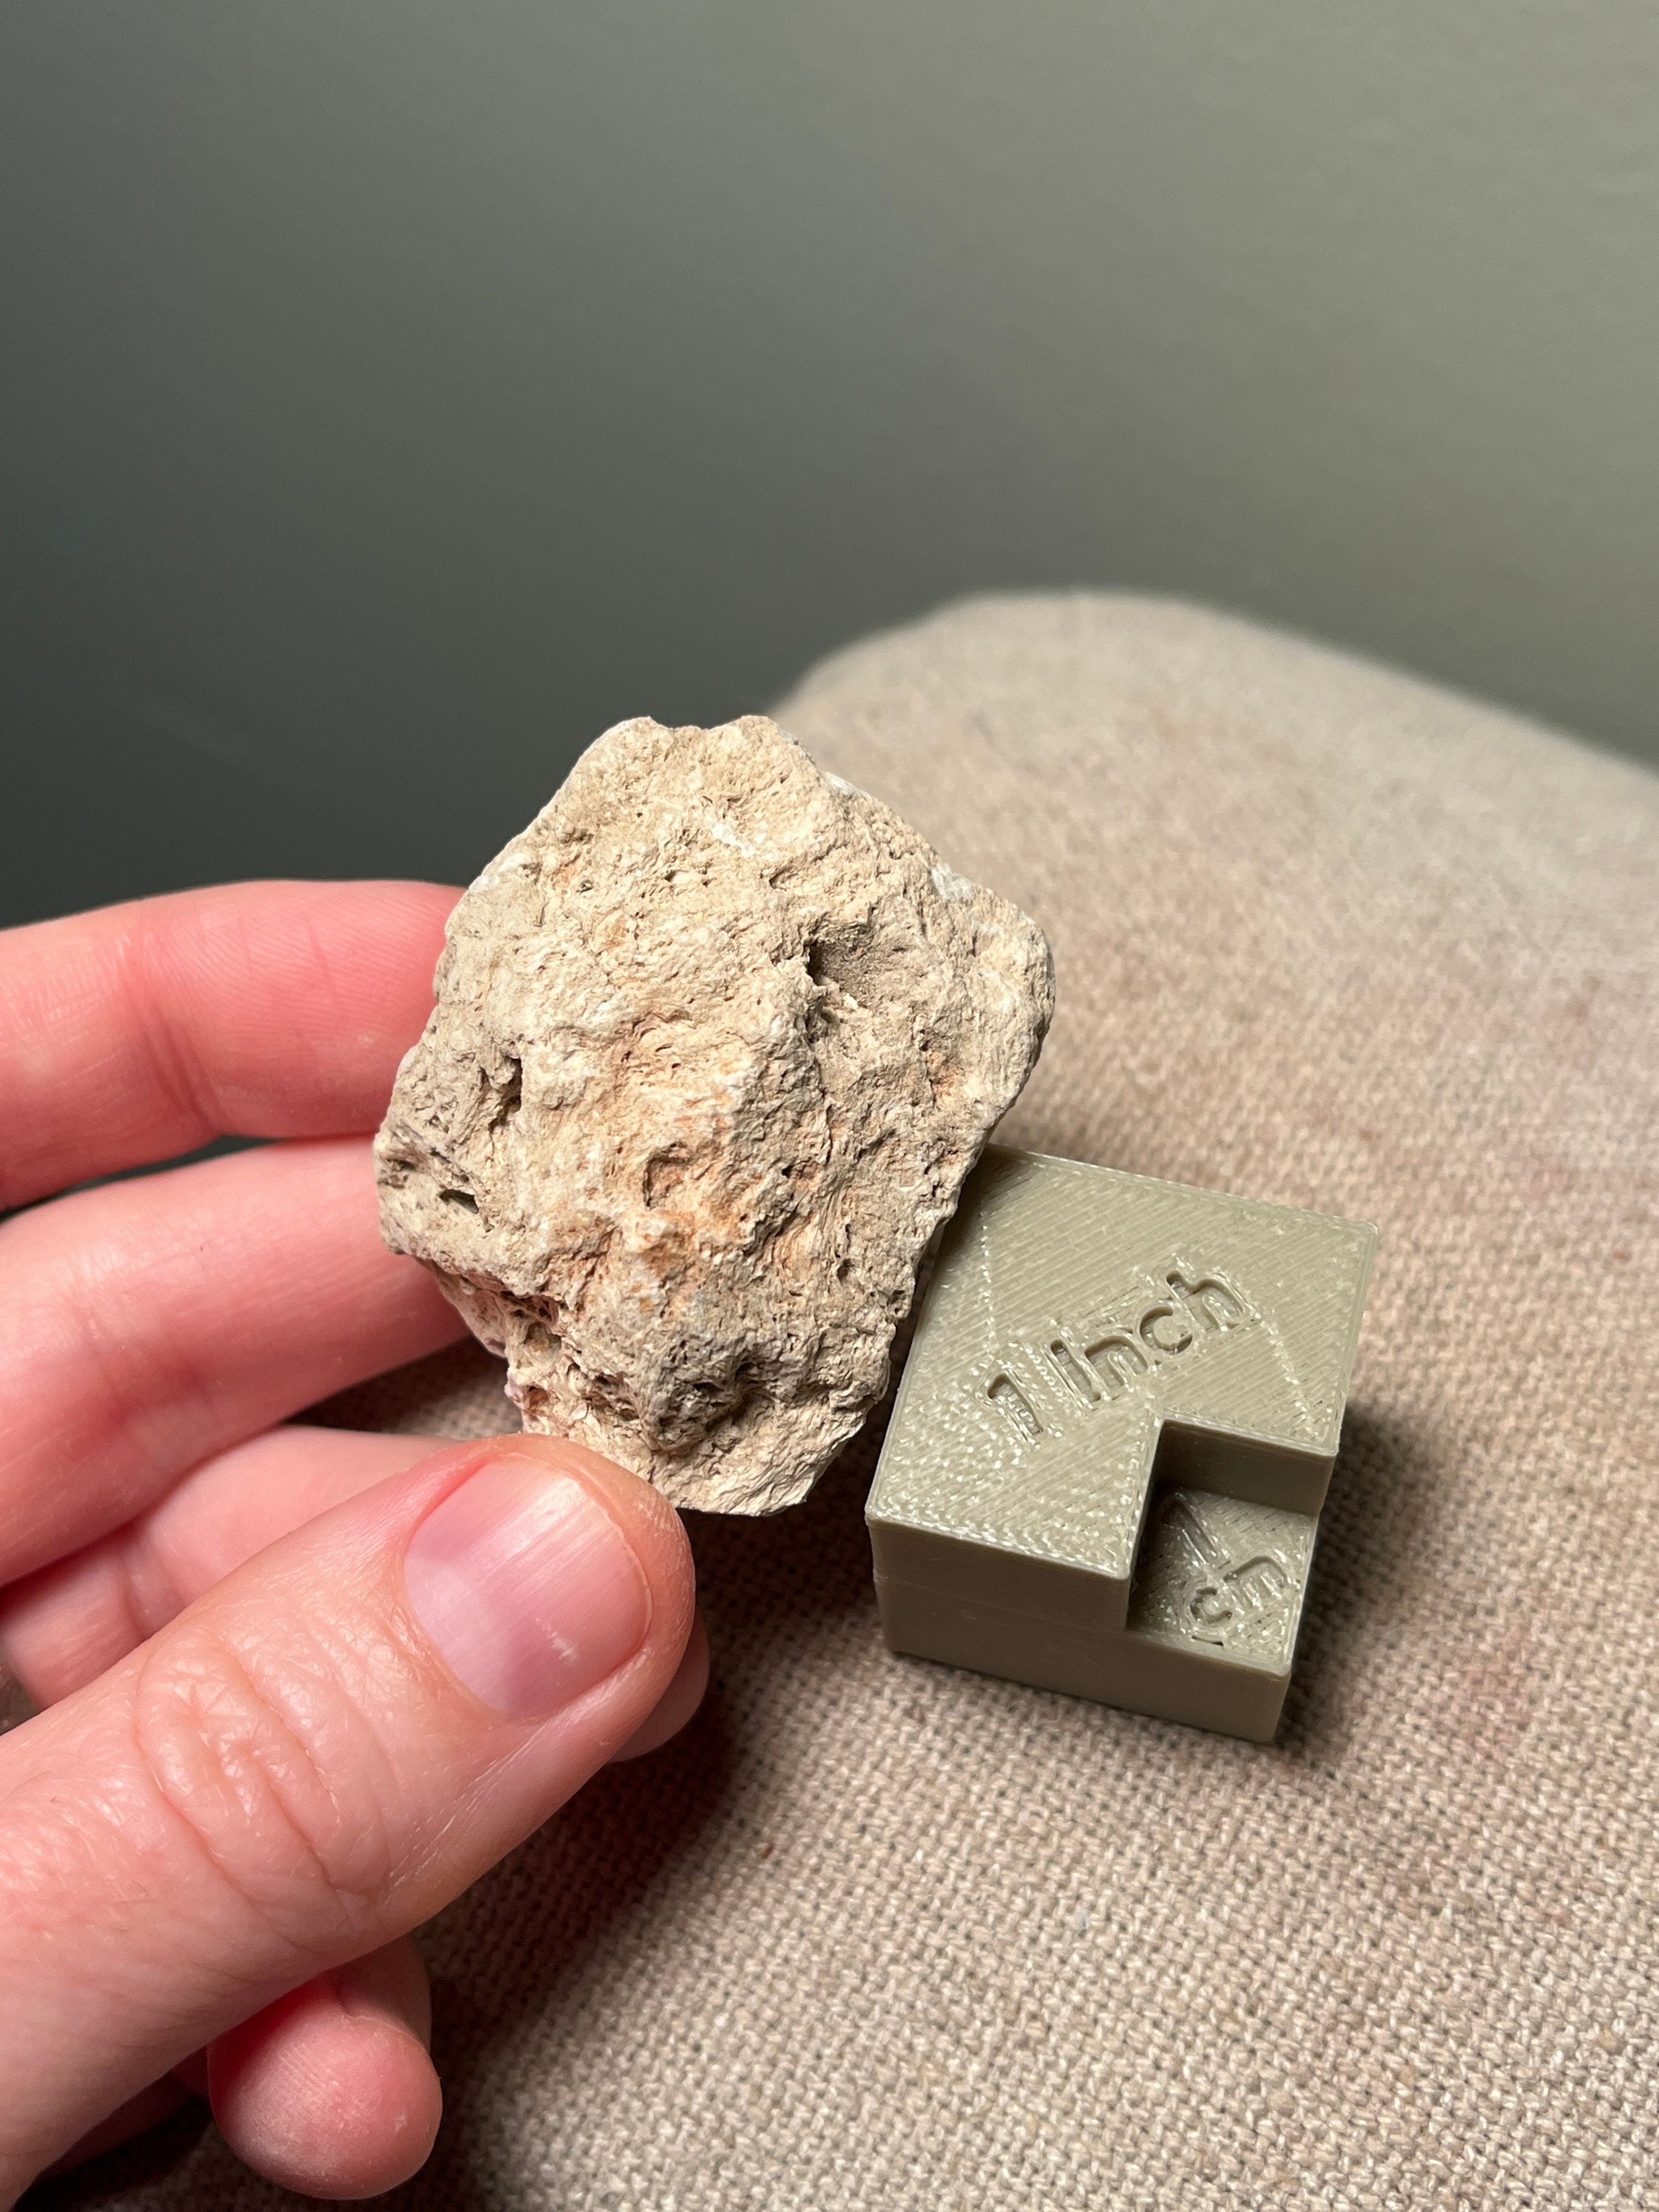 Sensory Pumice Stone for Anxiety Relief and Dermatillomania Relief